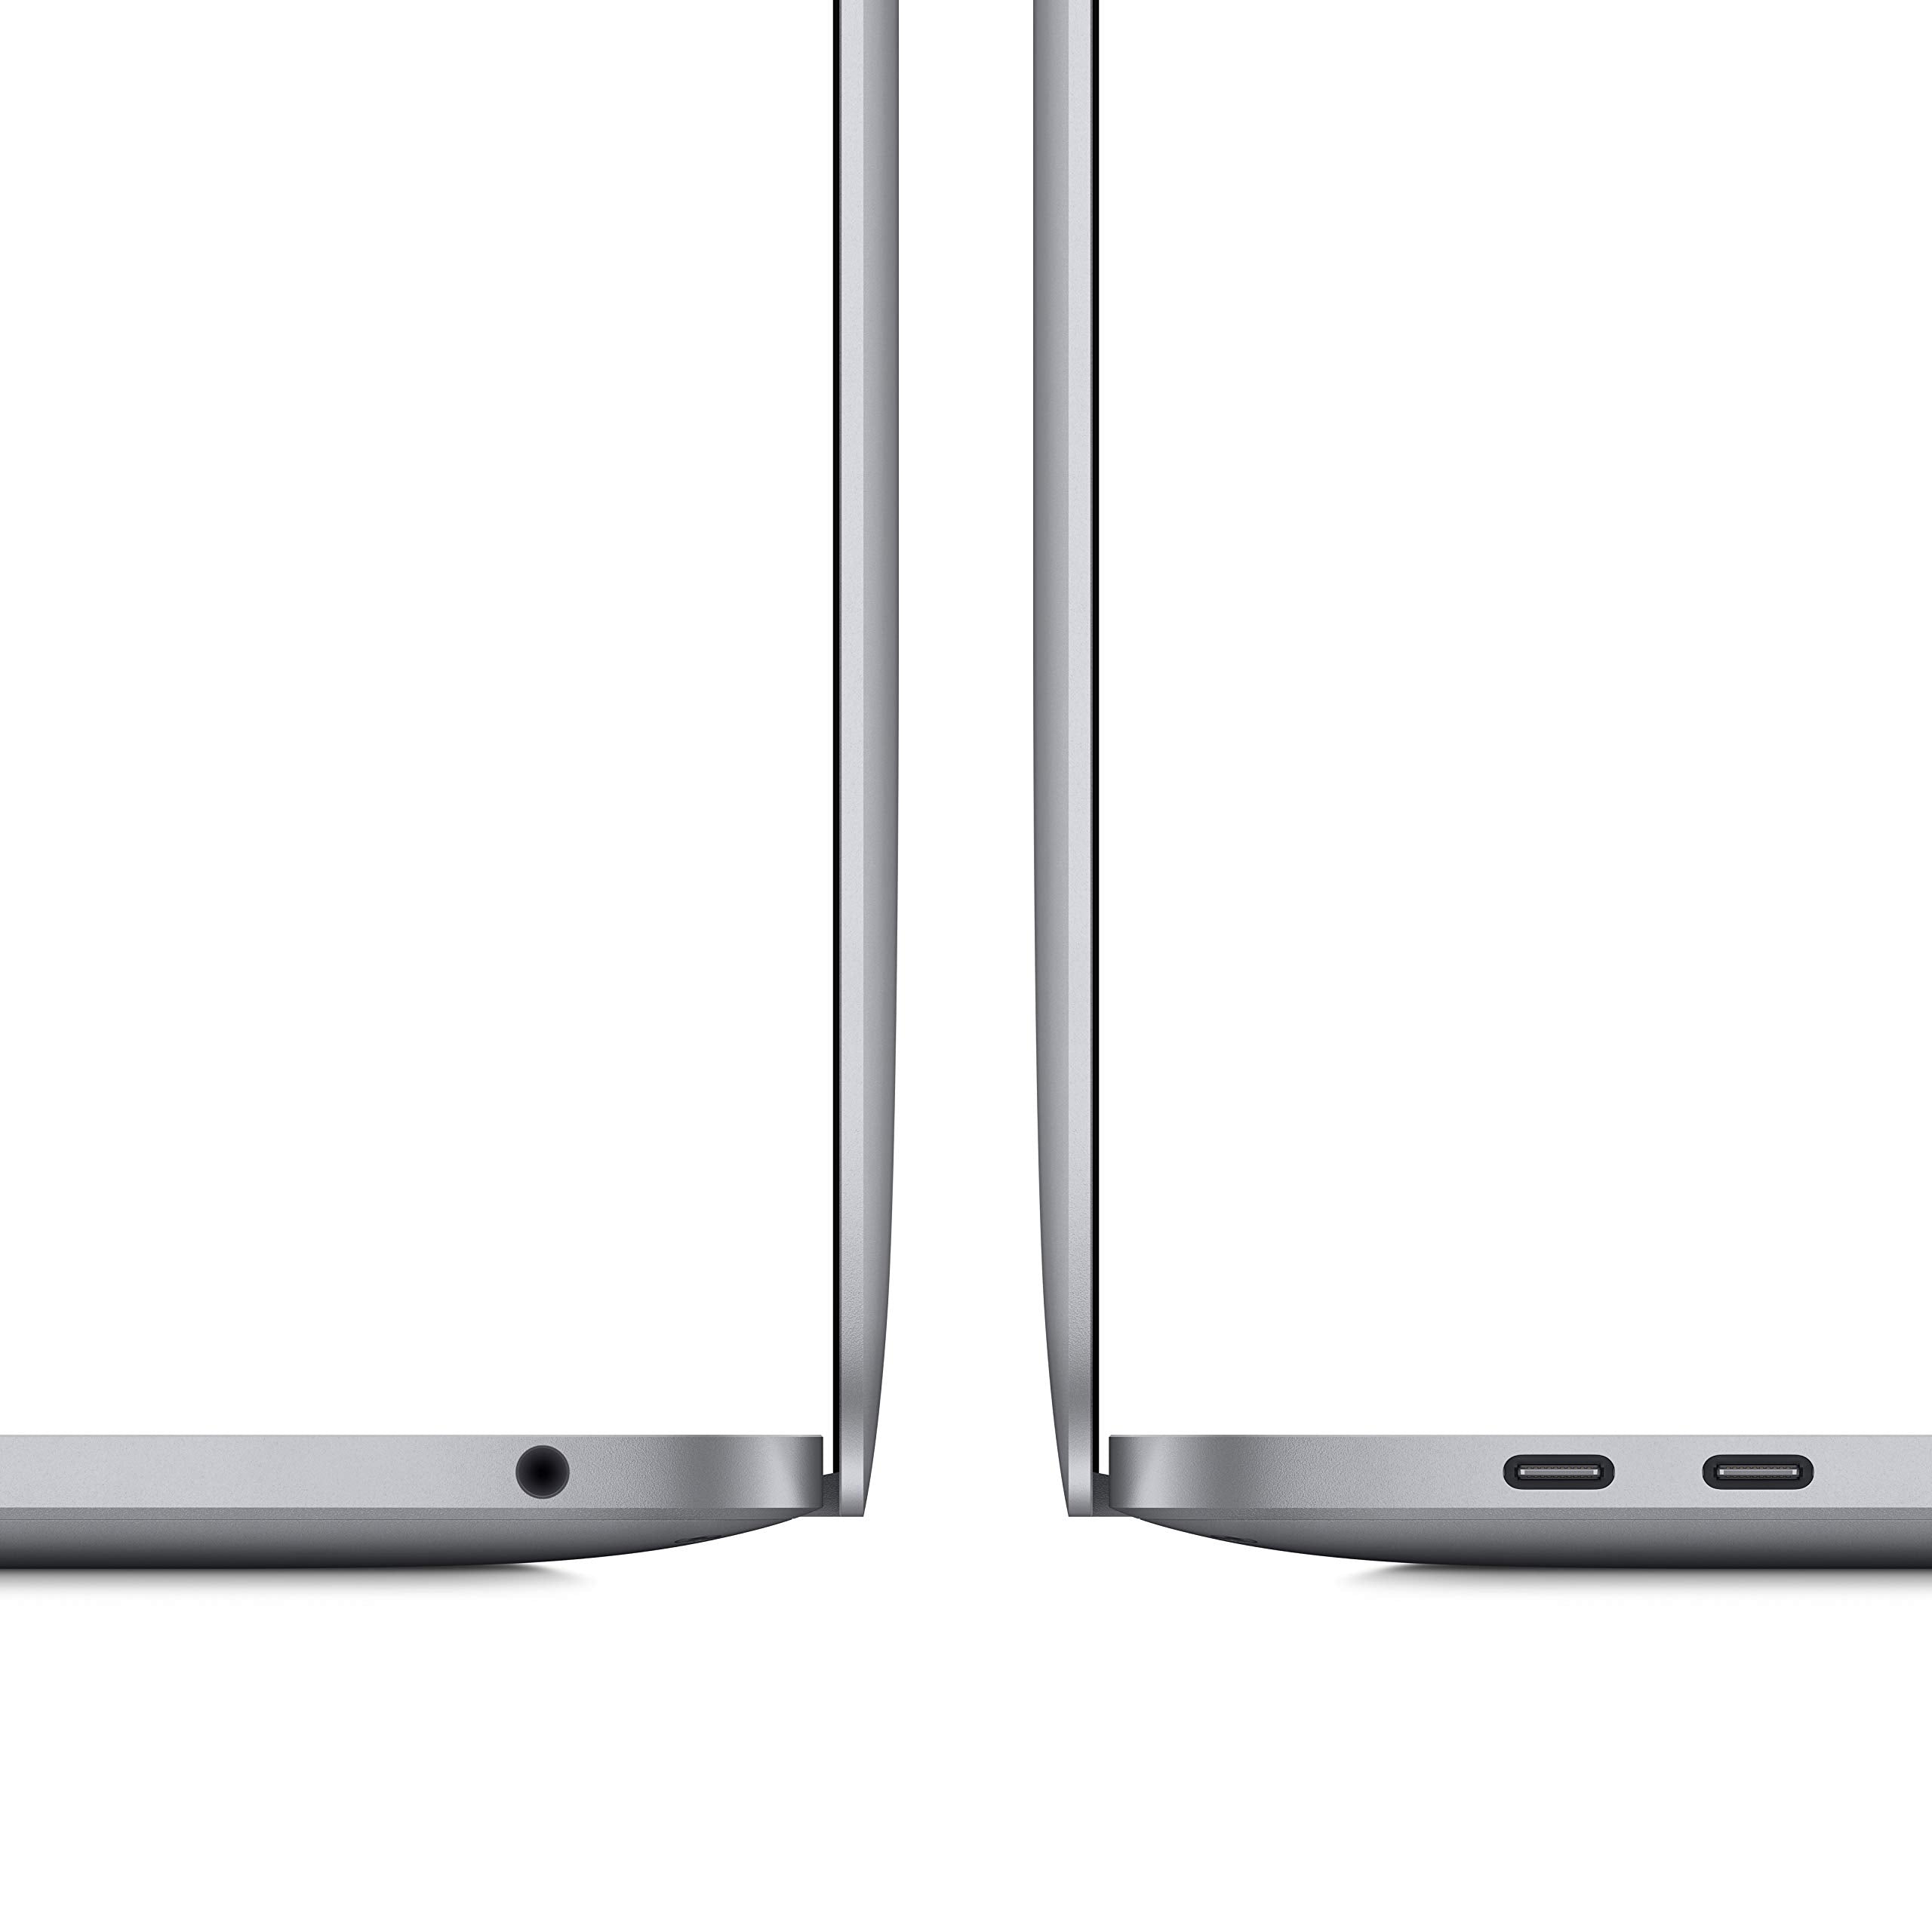 New Apple MacBook Pro with Apple M1 Chip (13-inch, 8GB RAM, 512GB SSD) - Space Grey (Latest Model)